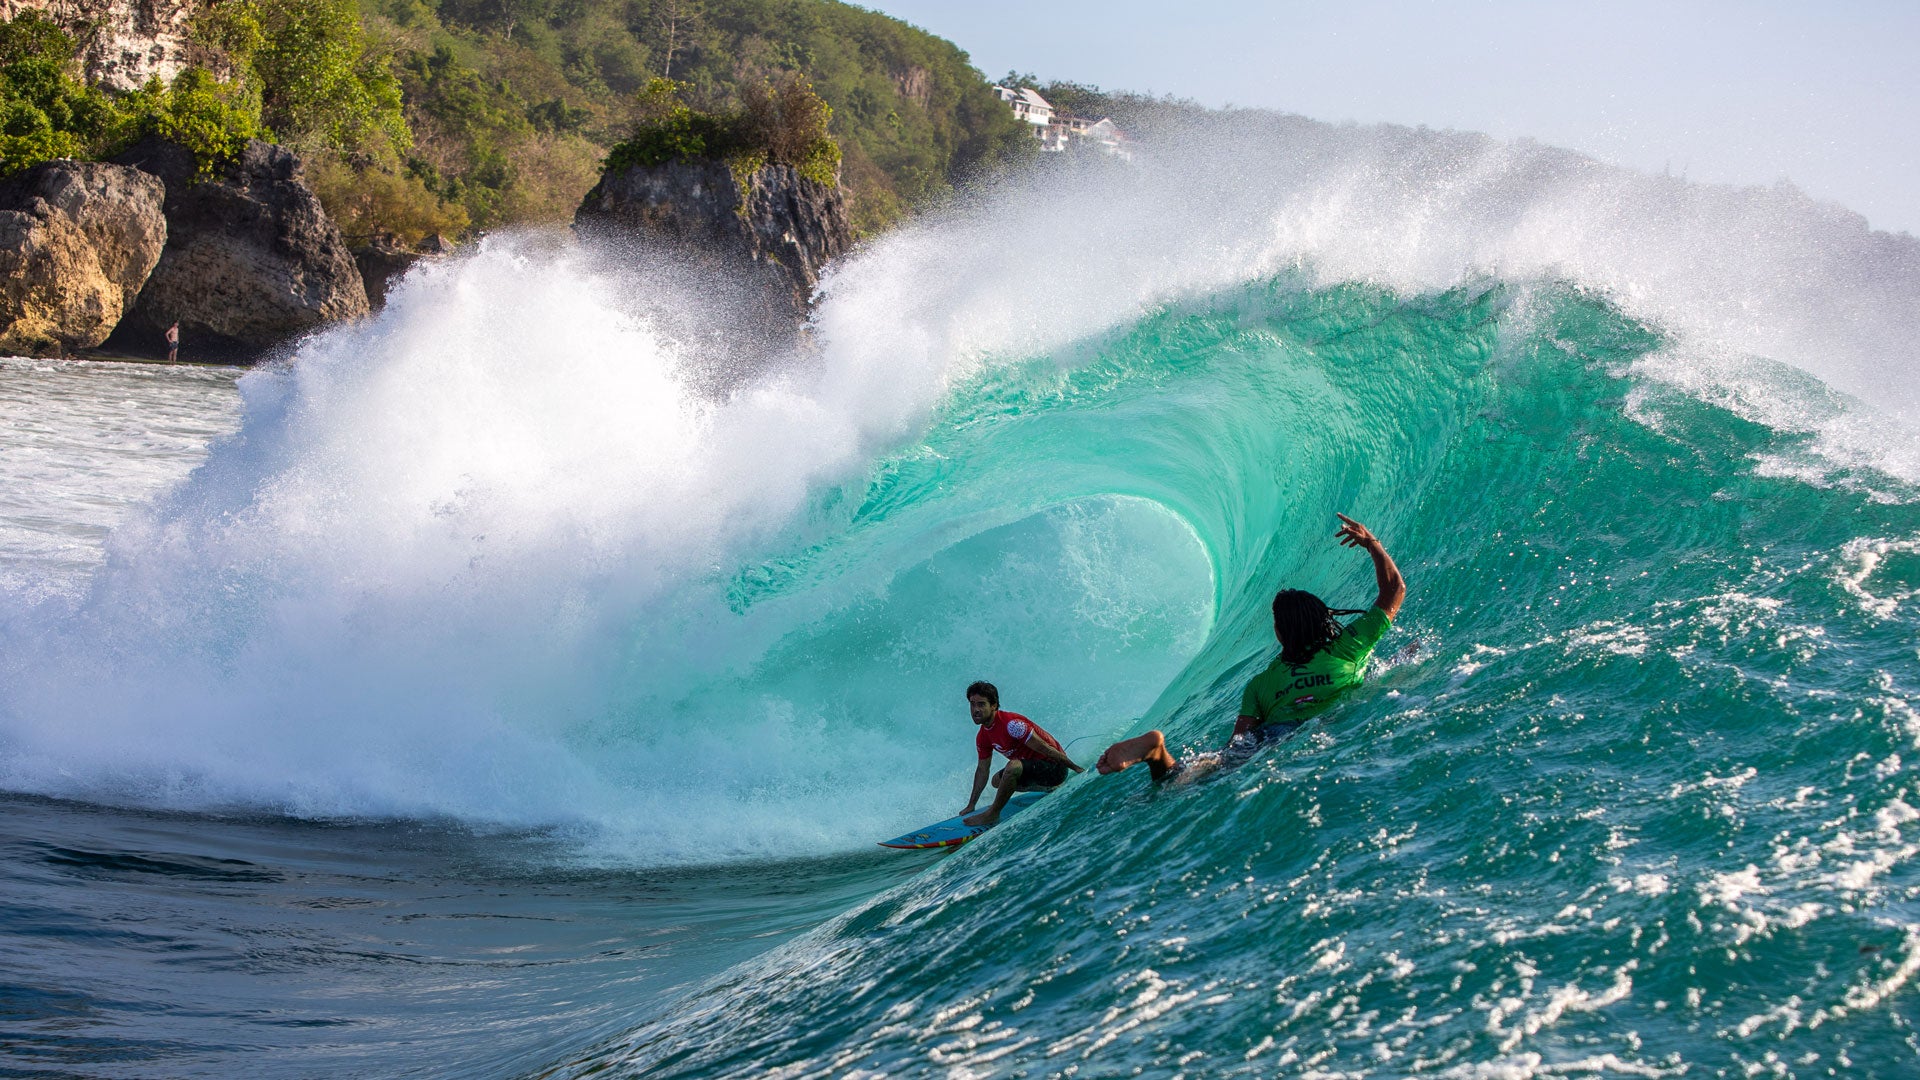 Padang Padang Awakens For
Rip Curl Cup Warm-Up Session